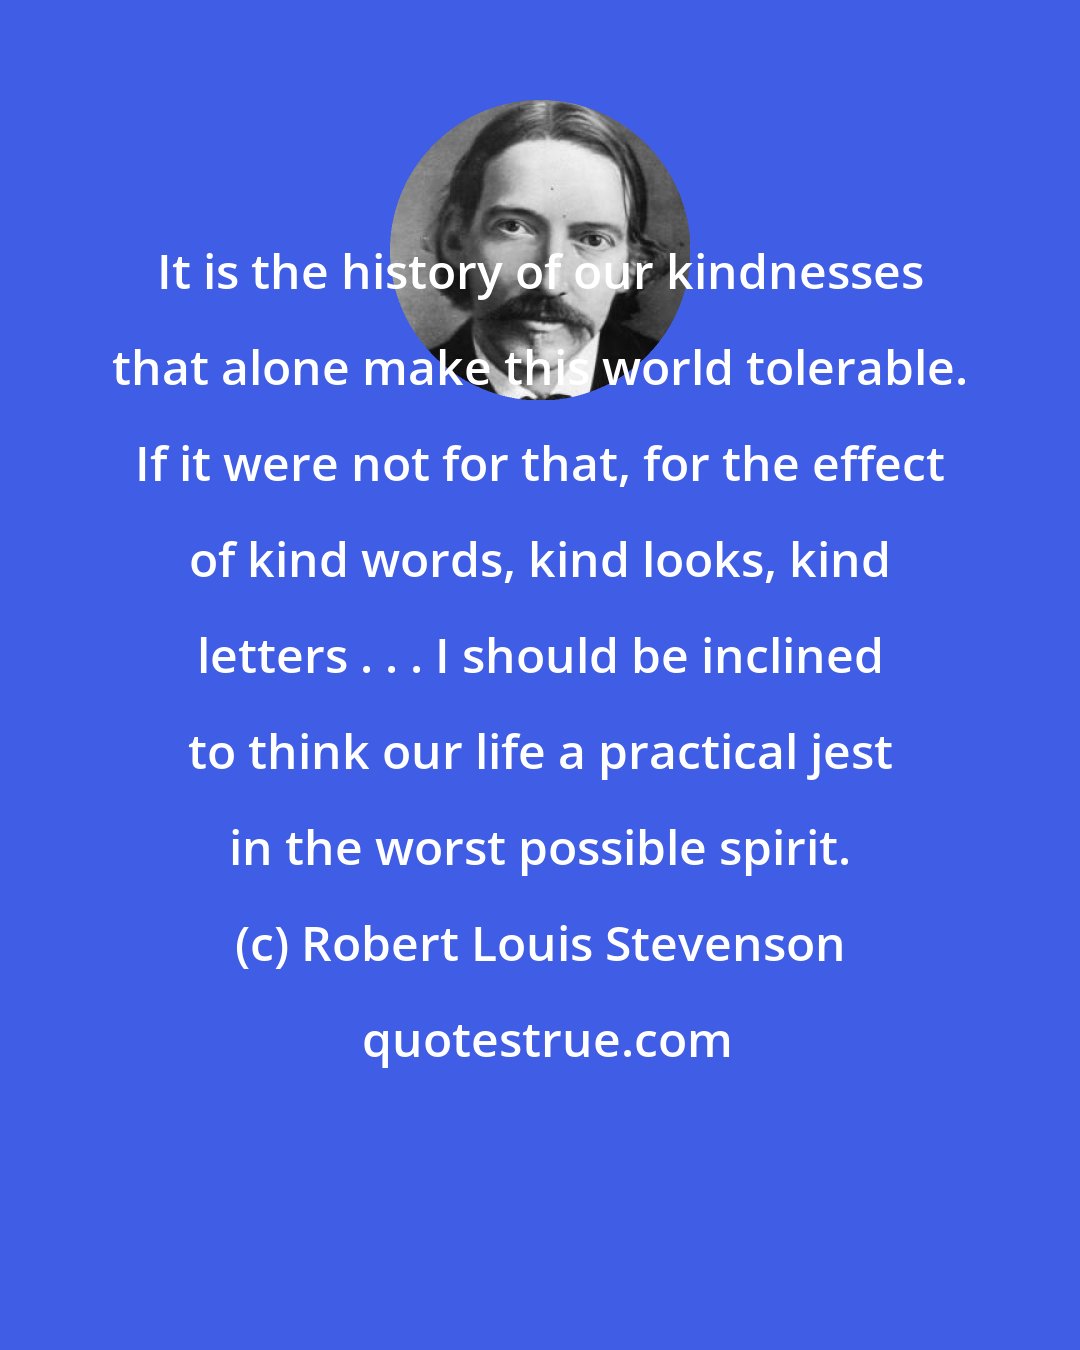 Robert Louis Stevenson: It is the history of our kindnesses that alone make this world tolerable. If it were not for that, for the effect of kind words, kind looks, kind letters . . . I should be inclined to think our life a practical jest in the worst possible spirit.